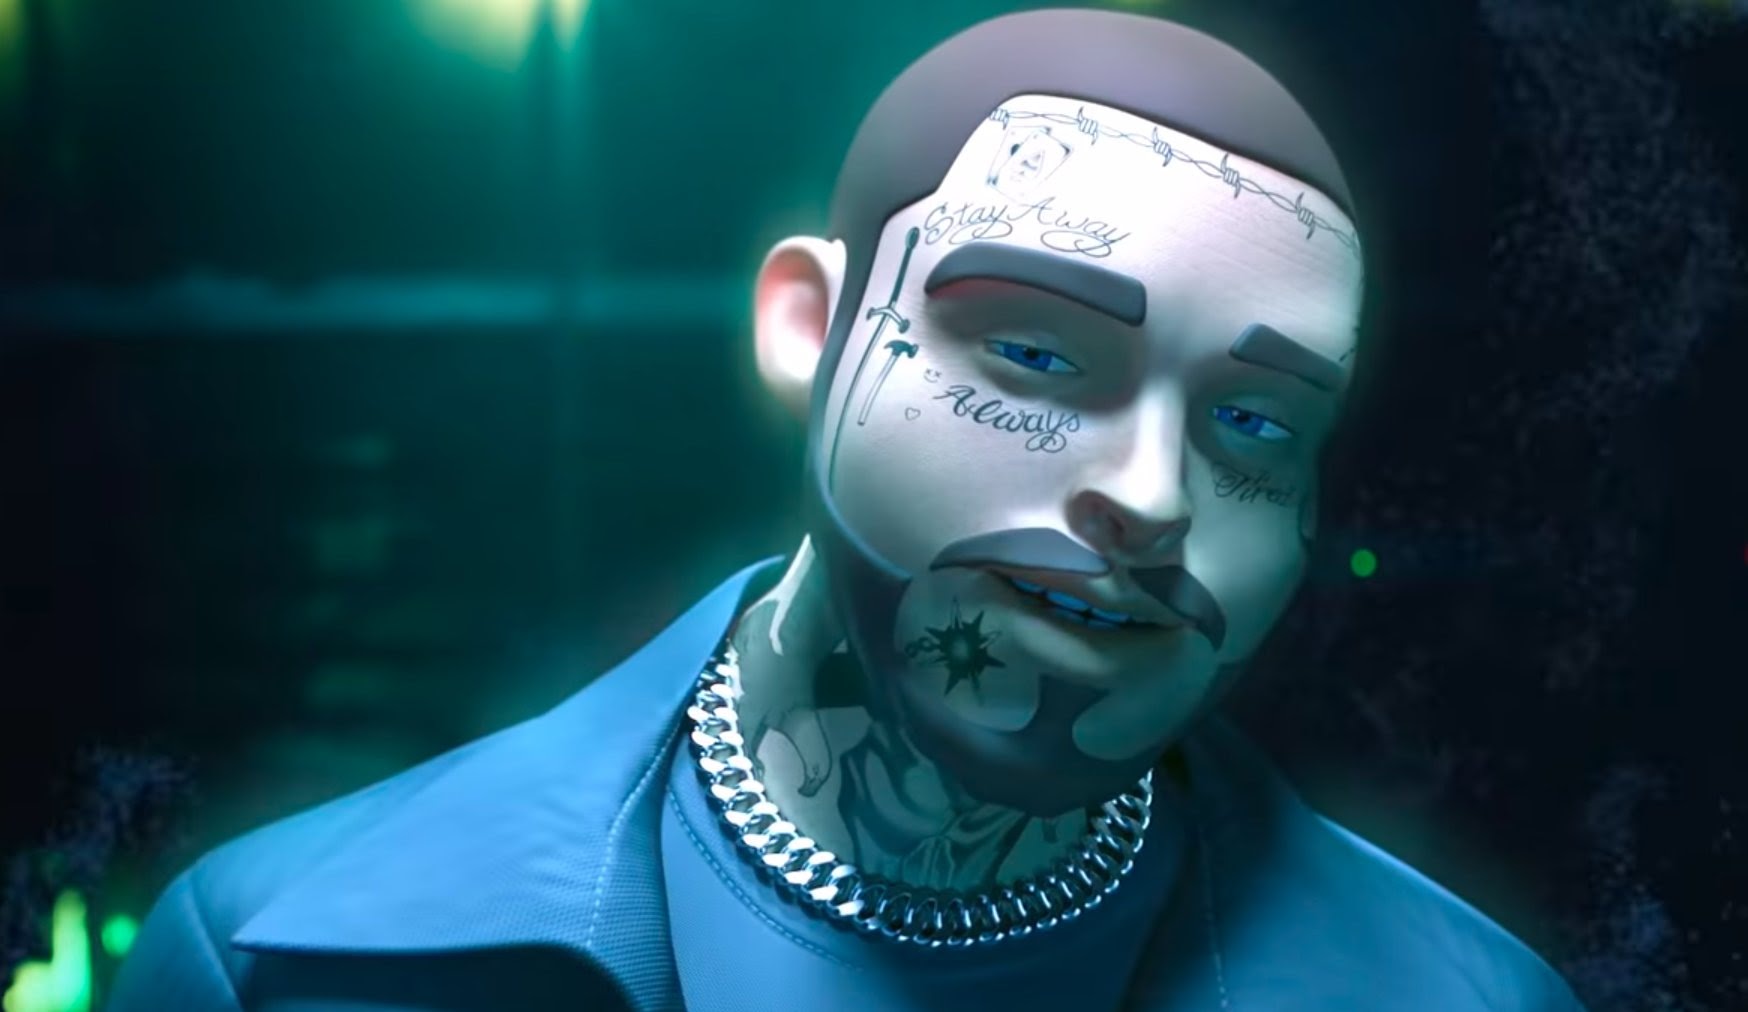 First Katy, now Post Malone in virtual concert for Pokémon anniversary